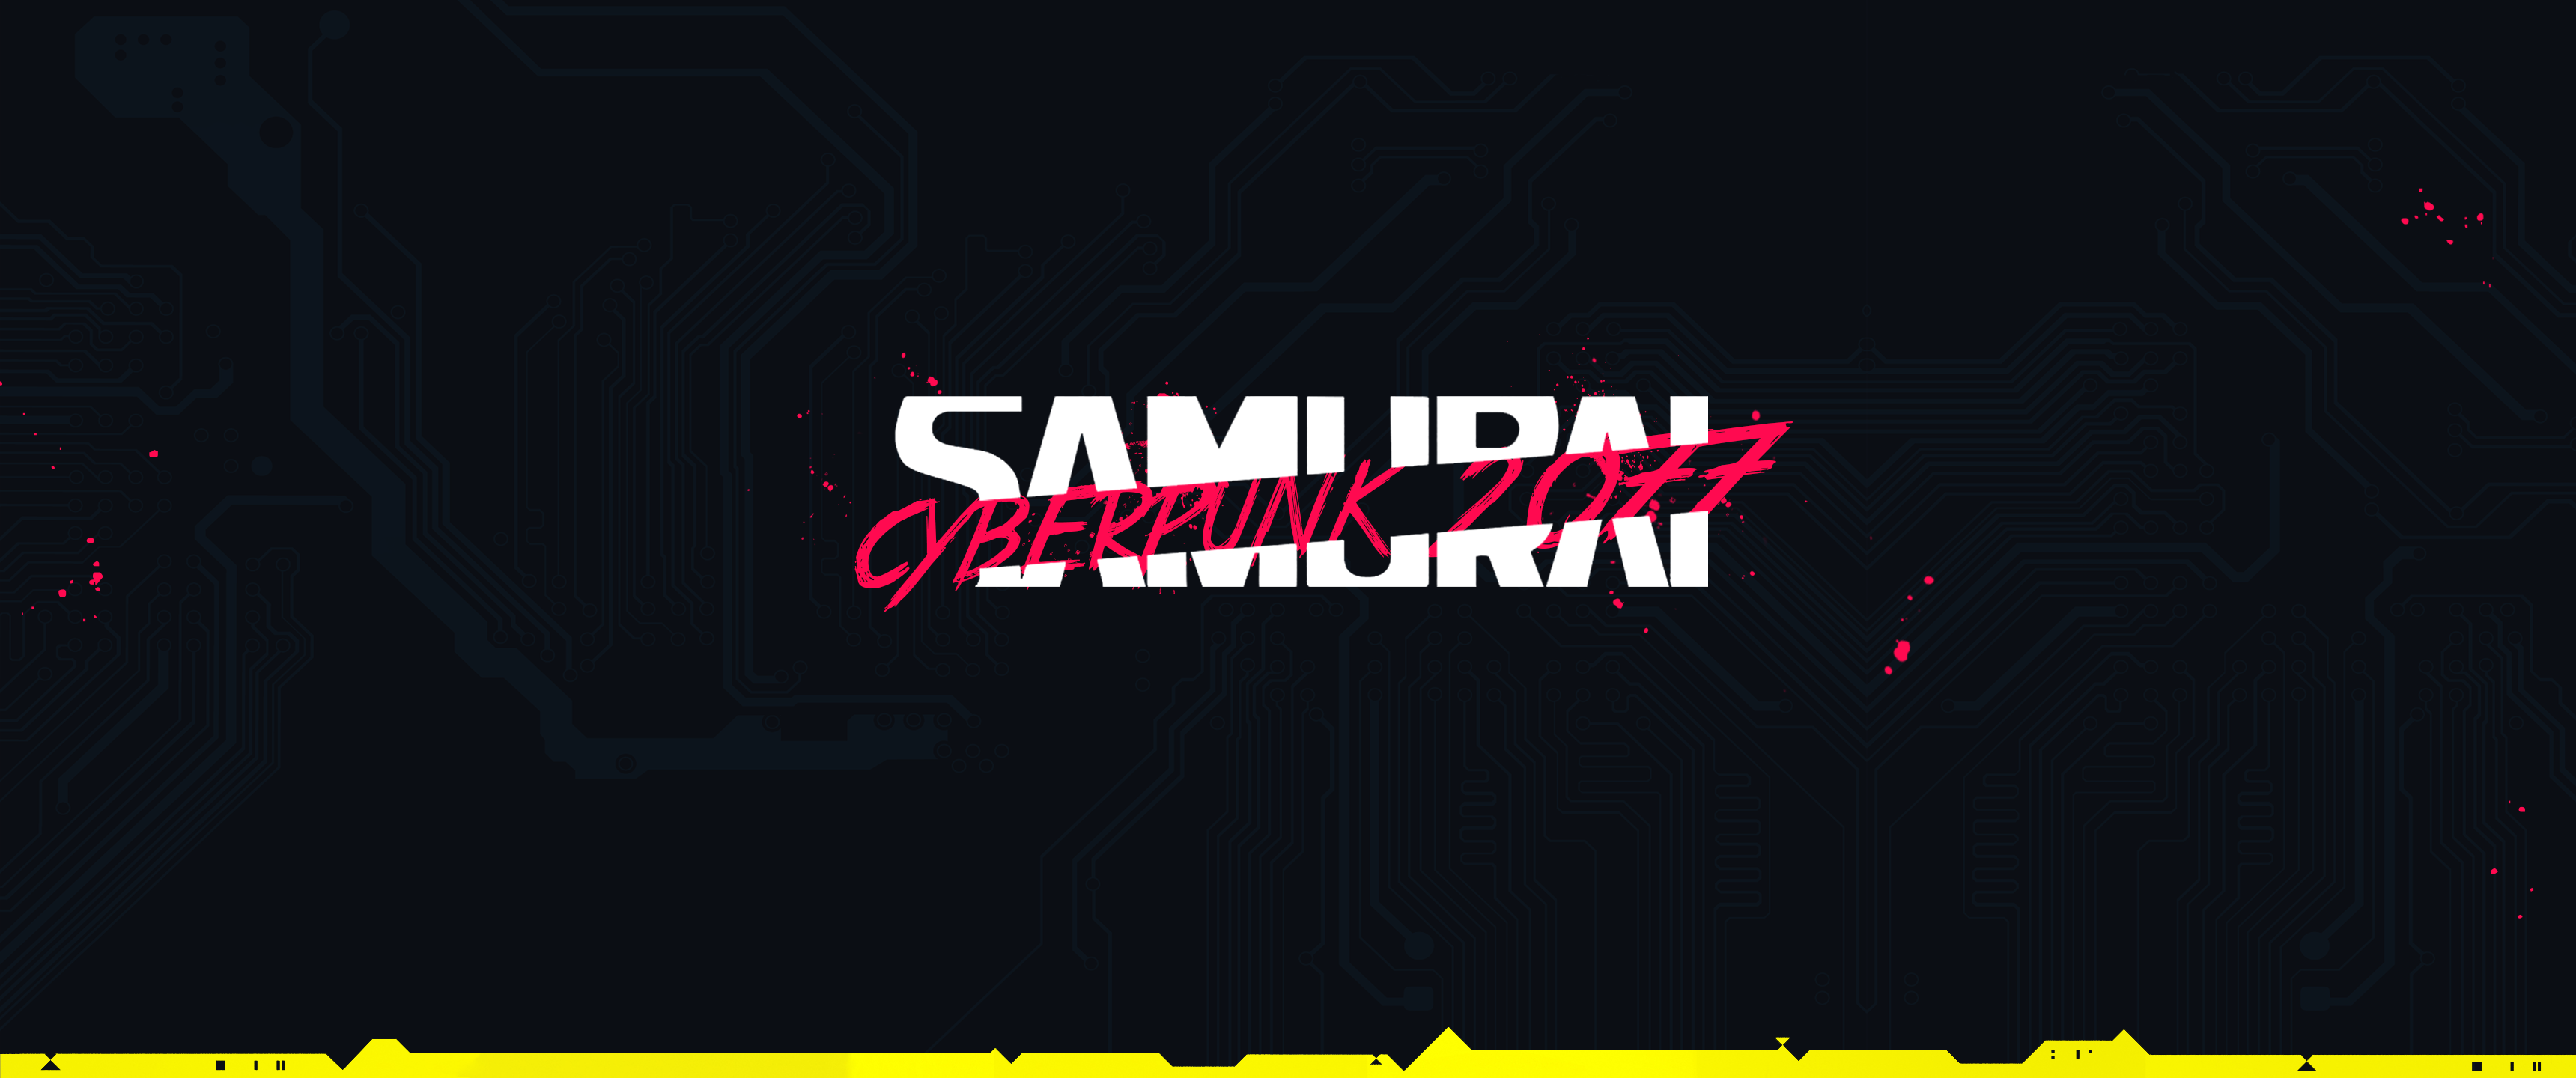 Featured image of post Cyberpunk 2077 Samurai Wallpaper 3440X1440 Tons of awesome samurai cyberpunk wallpapers to download for free